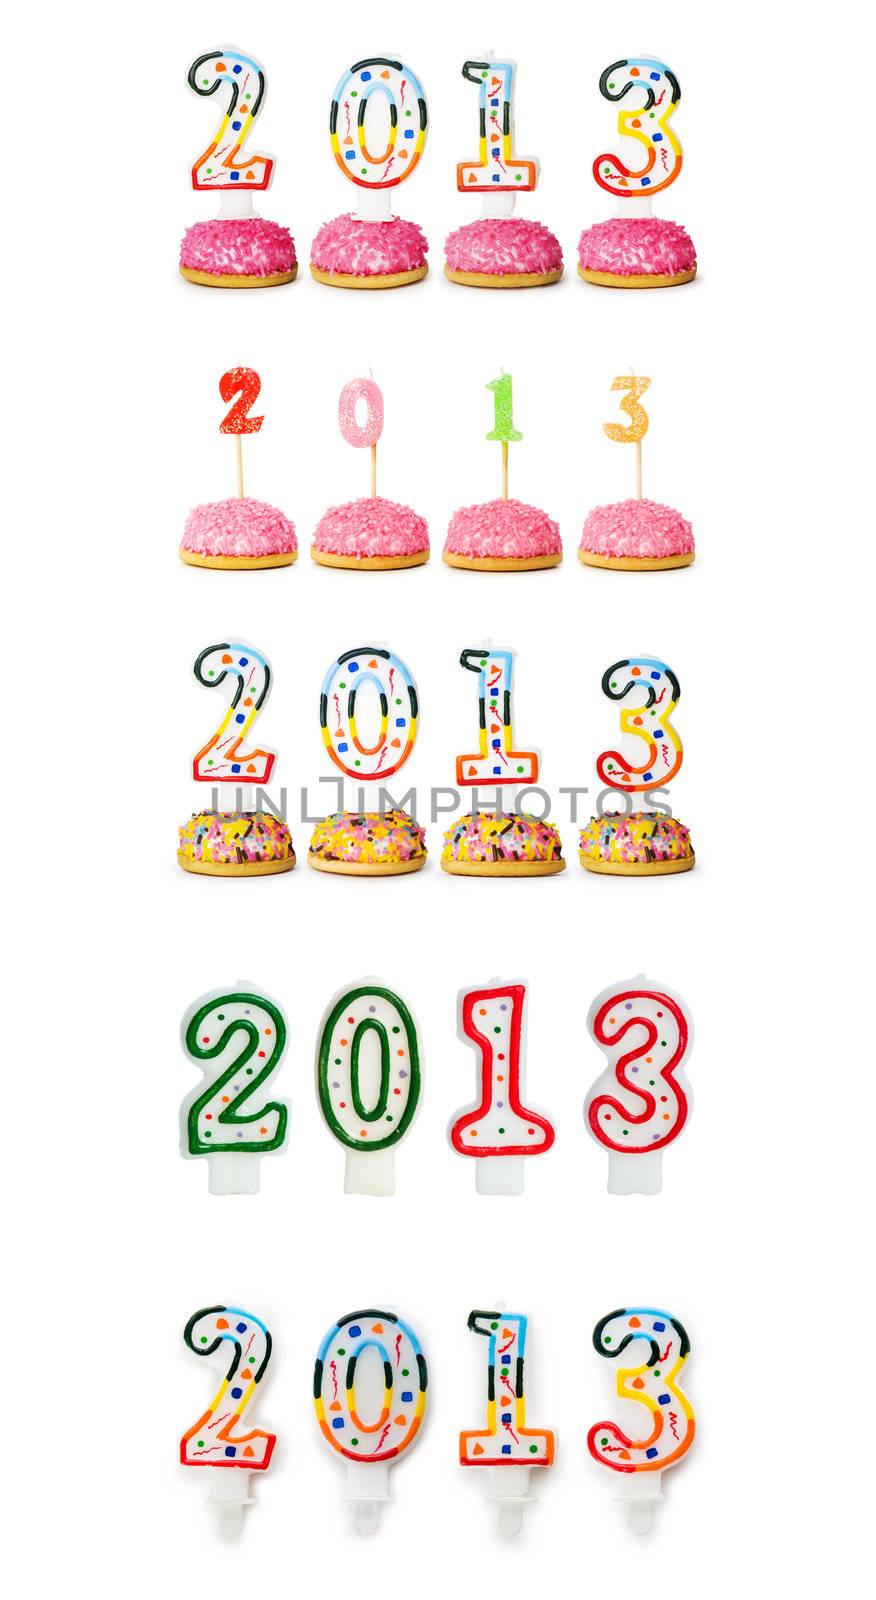 2013 made with cake candles